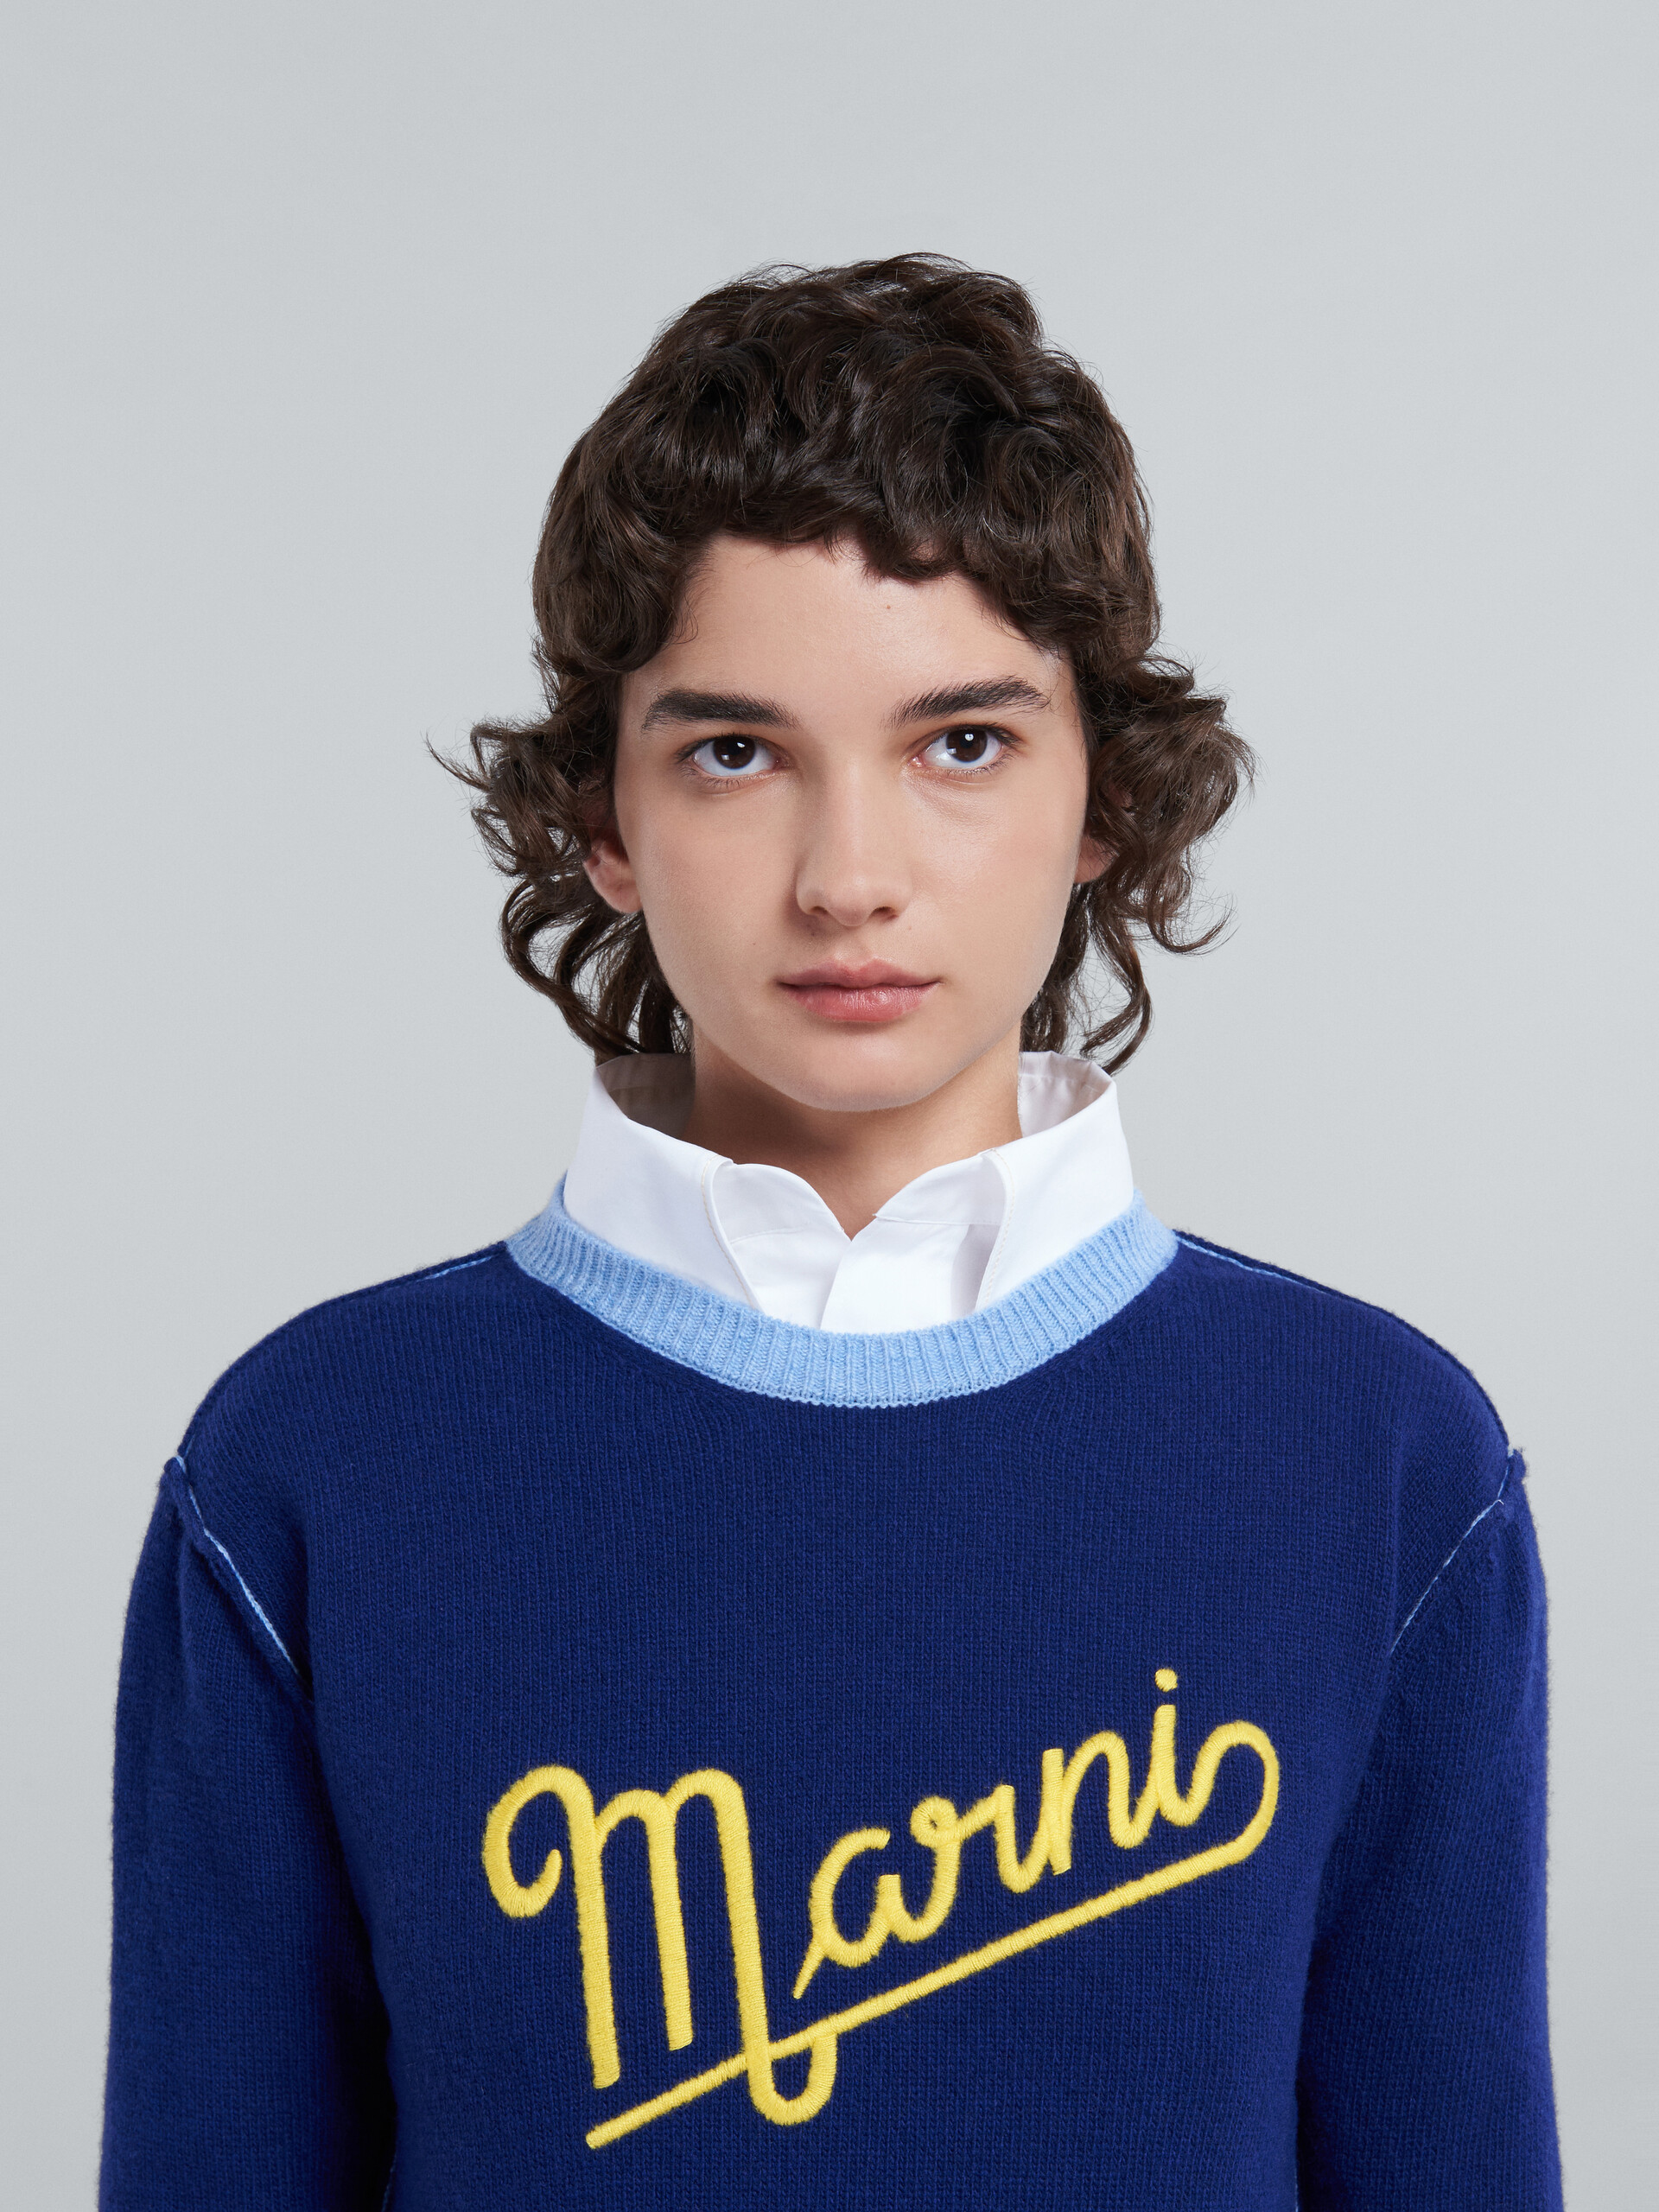 Blue wool sweater with logo - Pullovers - Image 4